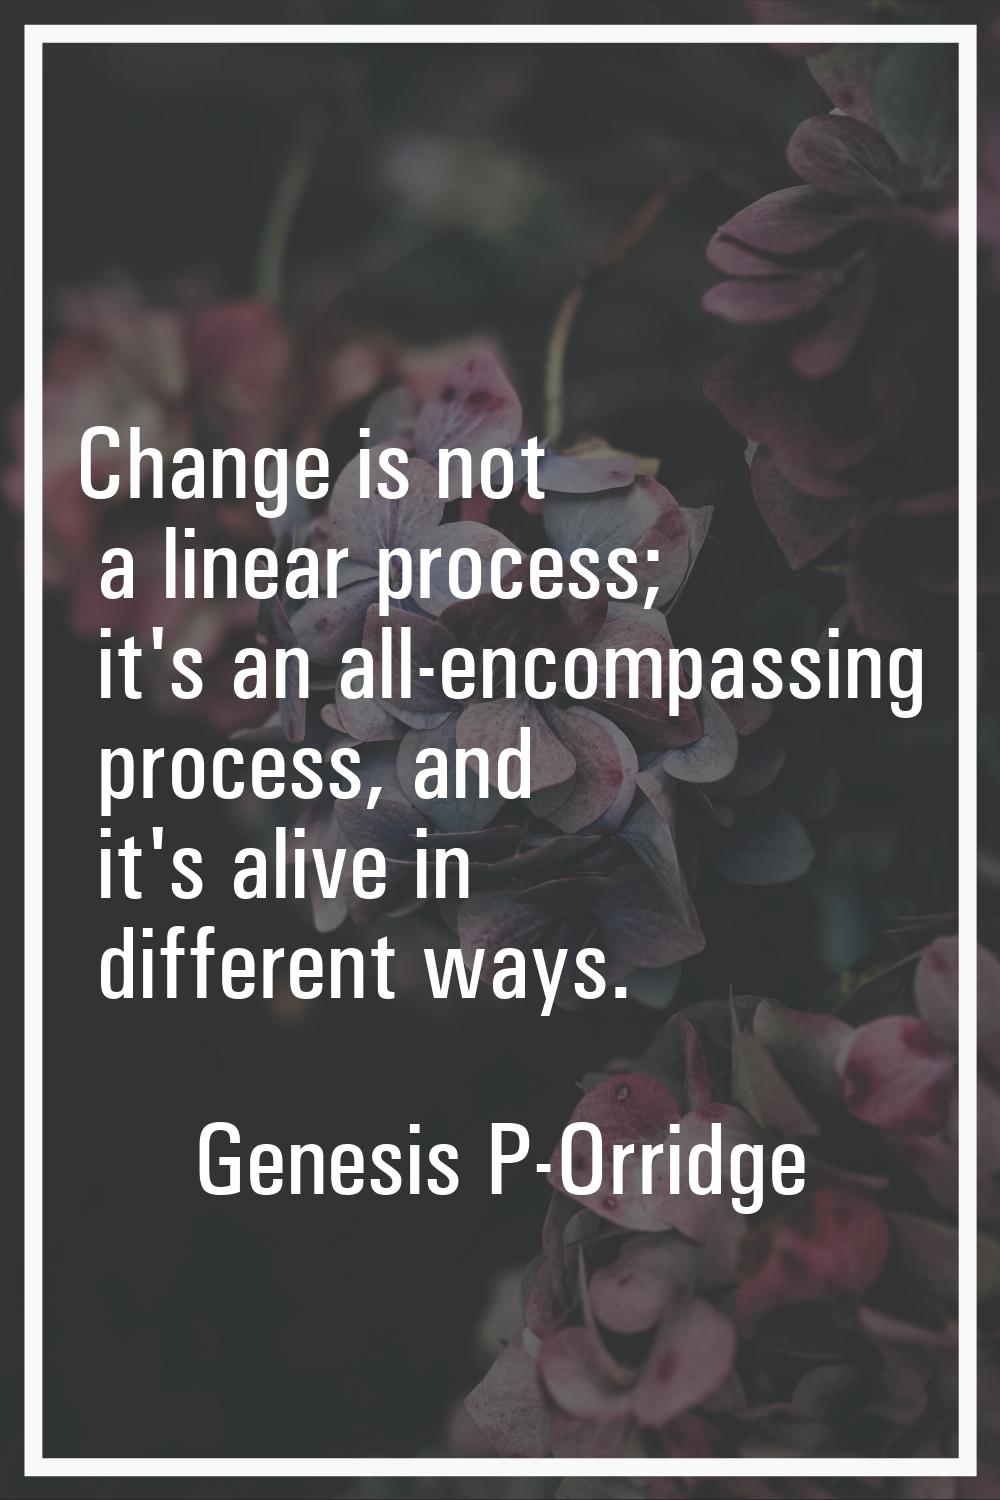 Change is not a linear process; it's an all-encompassing process, and it's alive in different ways.